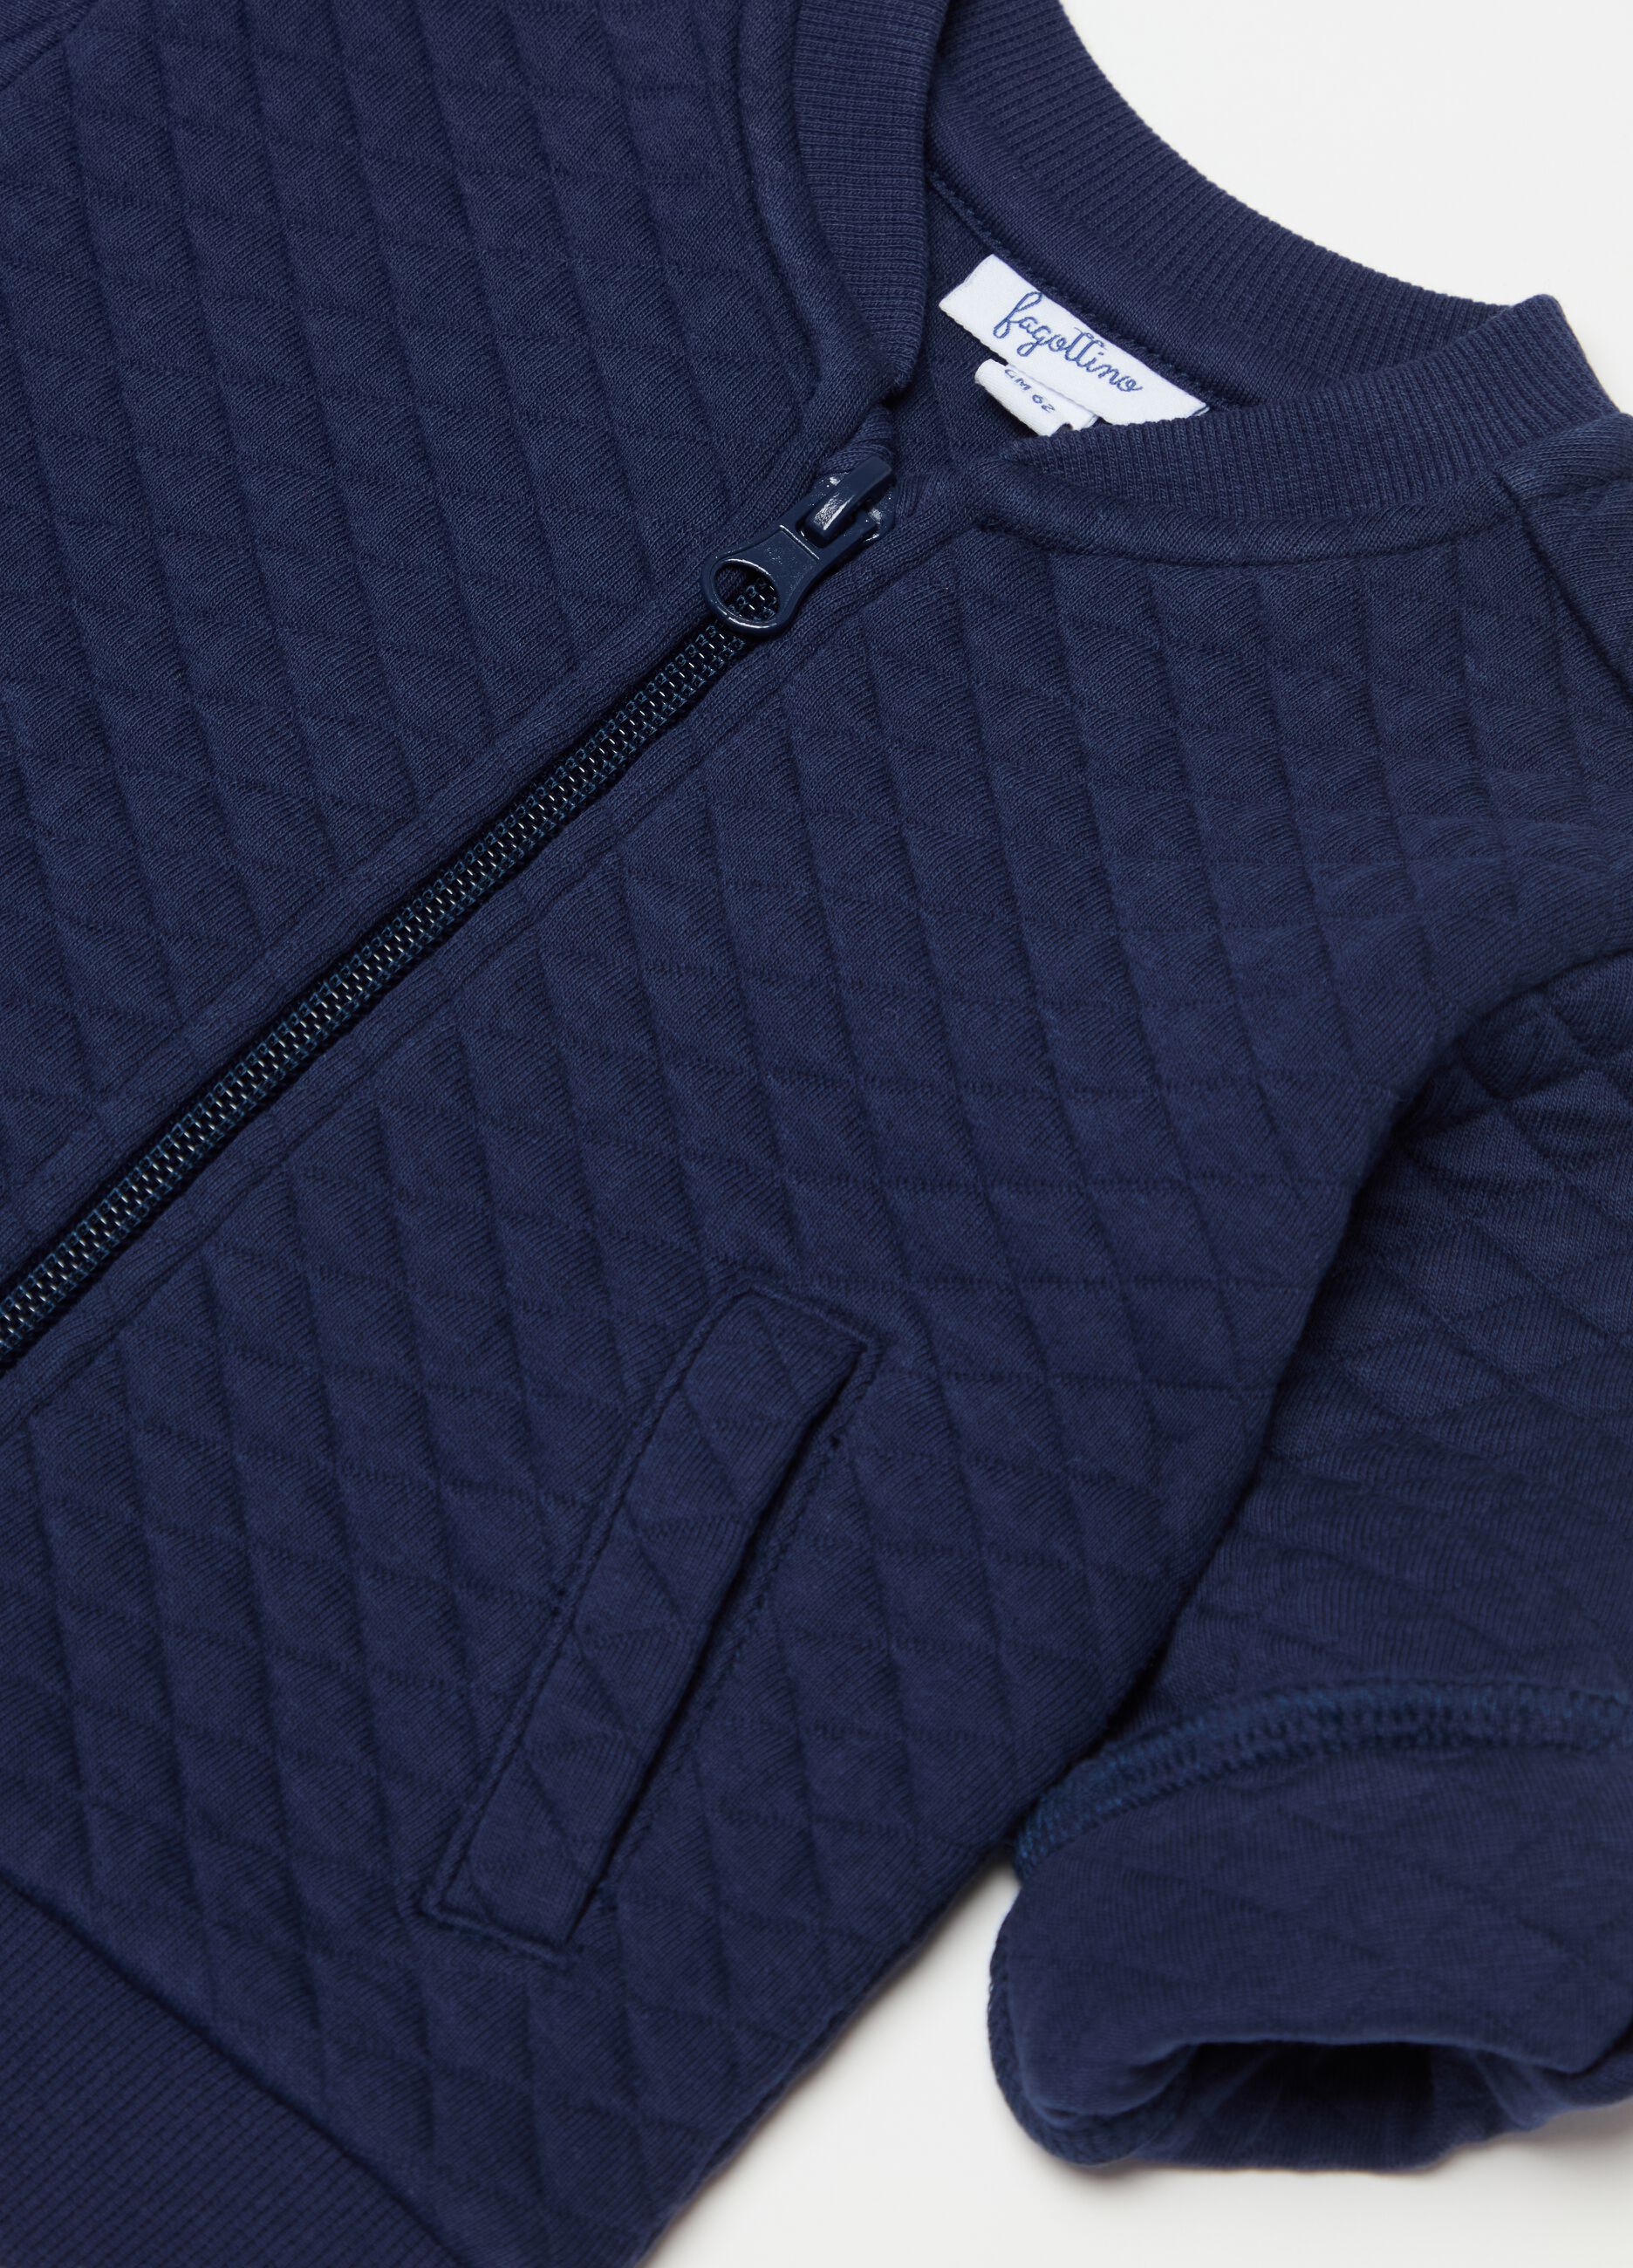 Full-zip sweatshirt with diamond quilting and pockets